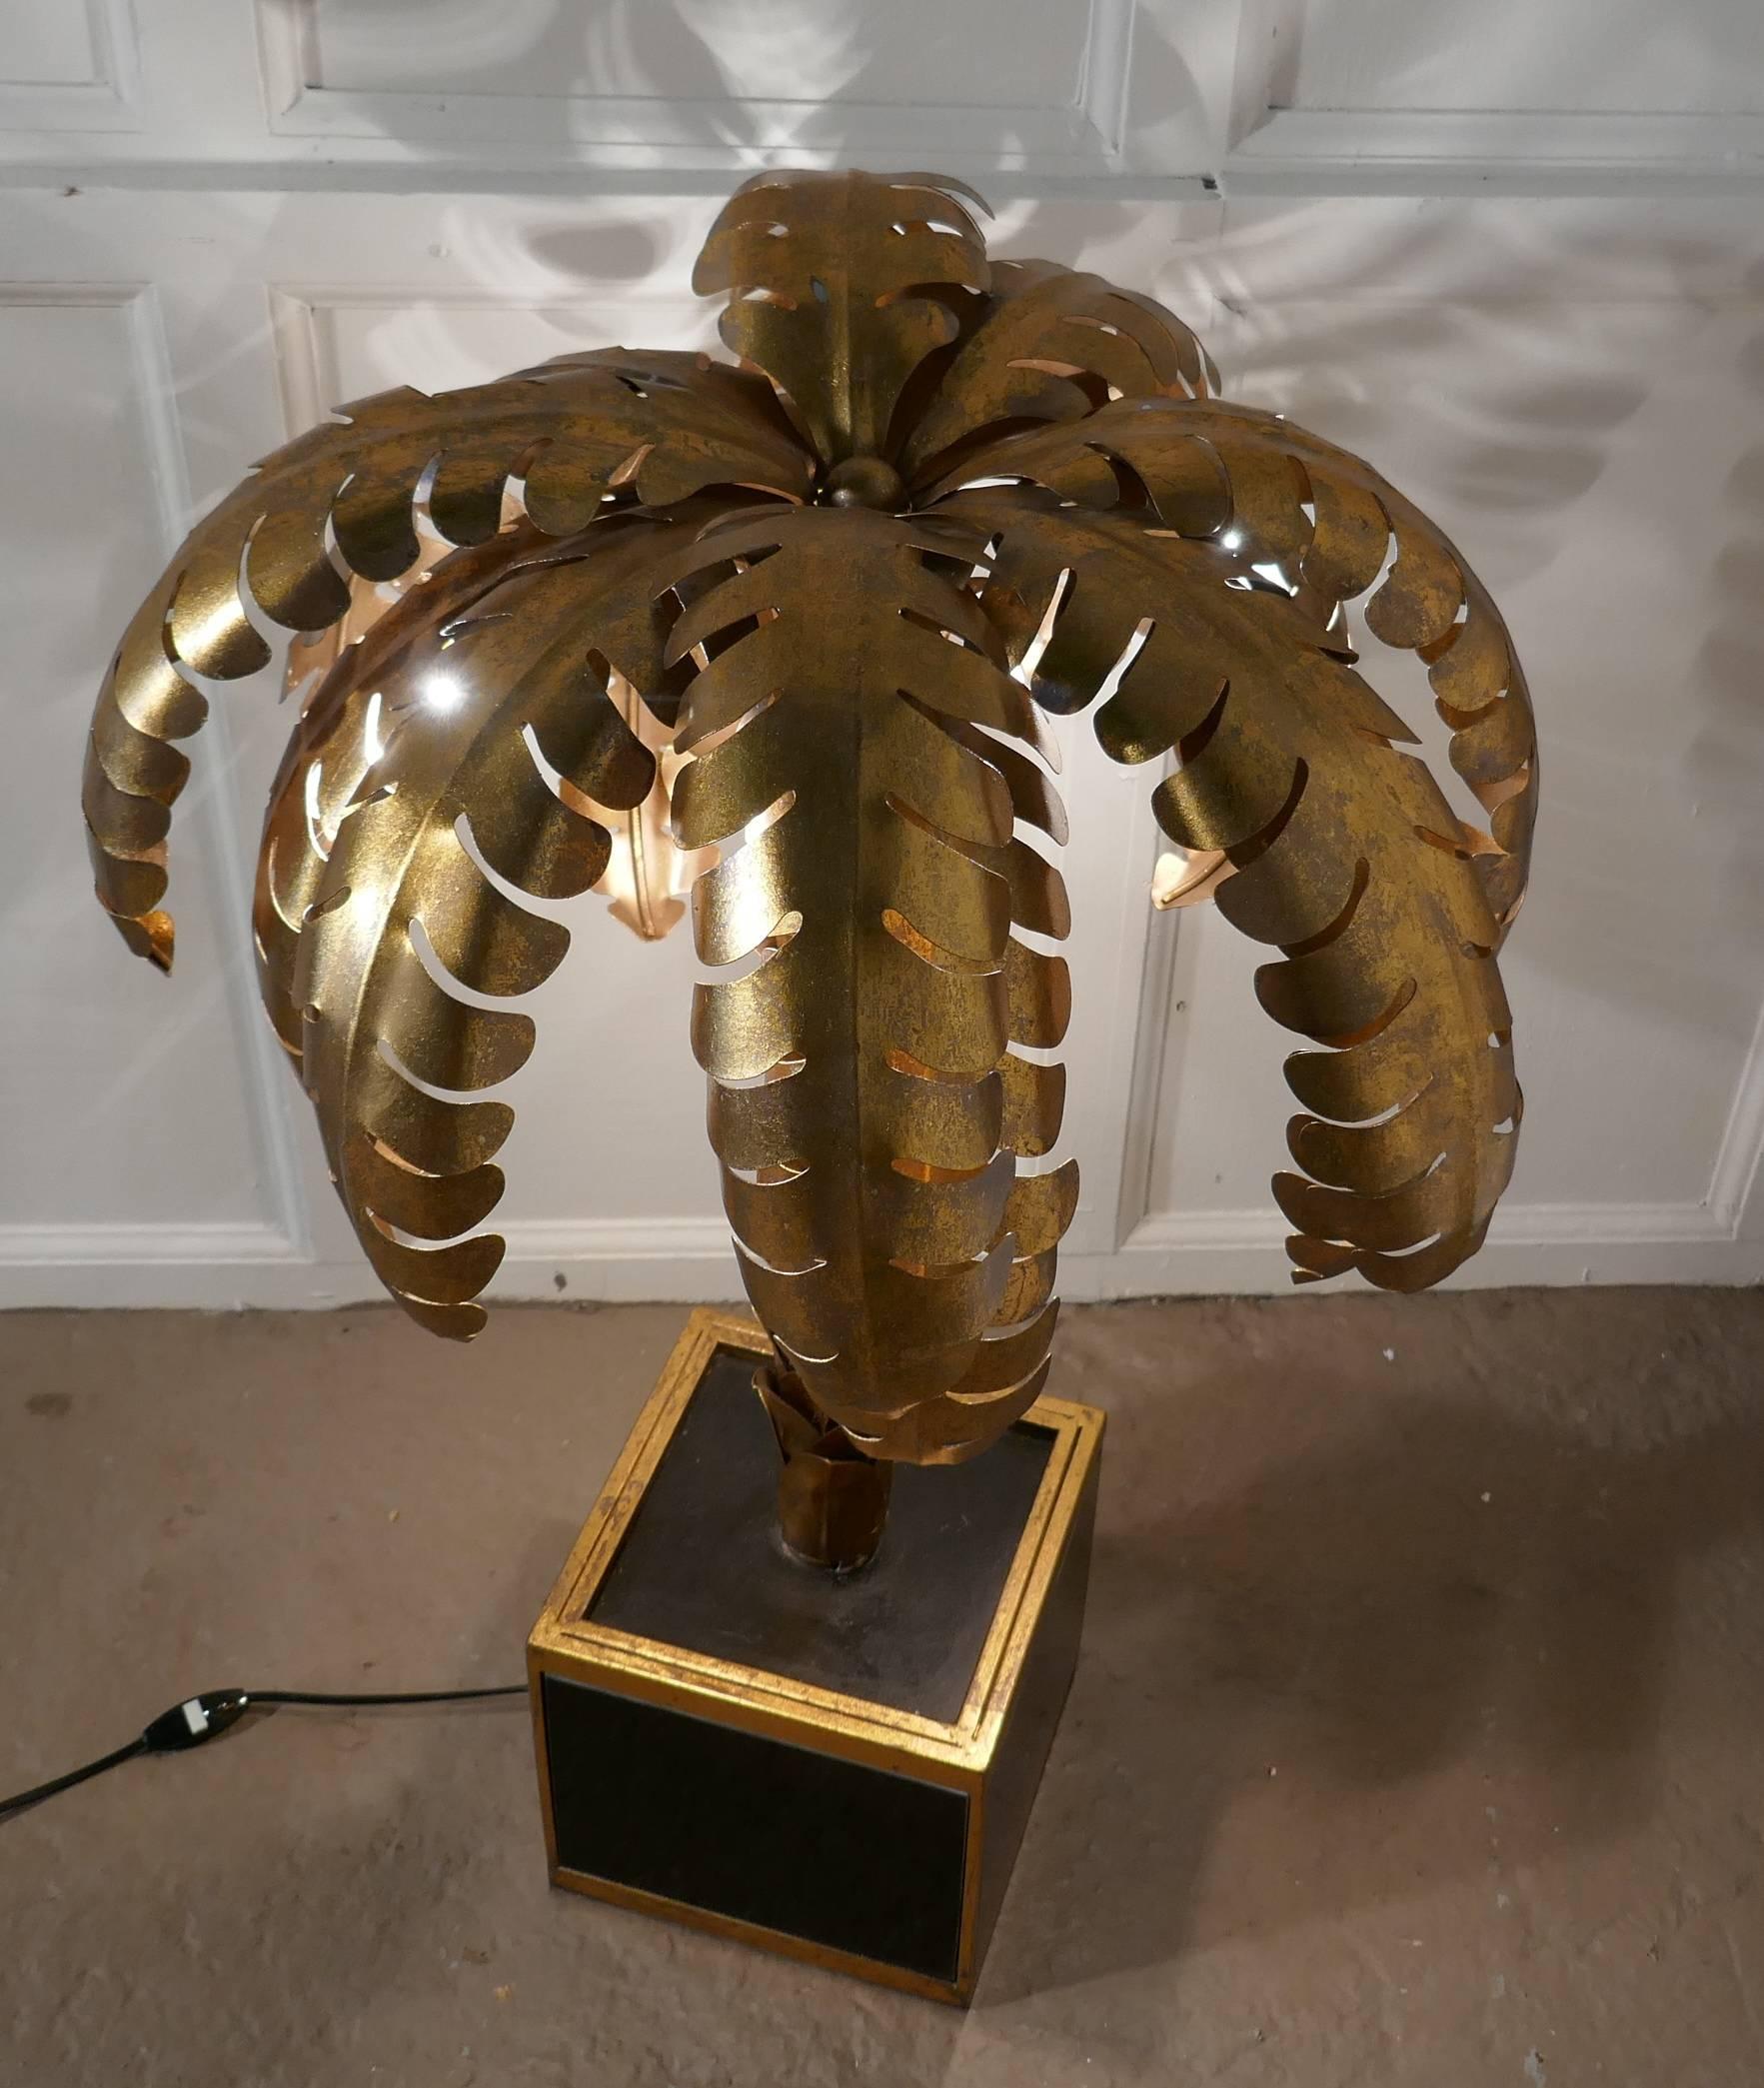 20th Century French Palm Tree Tole Ware Table Lamp from Maison Jansen, circa 1970